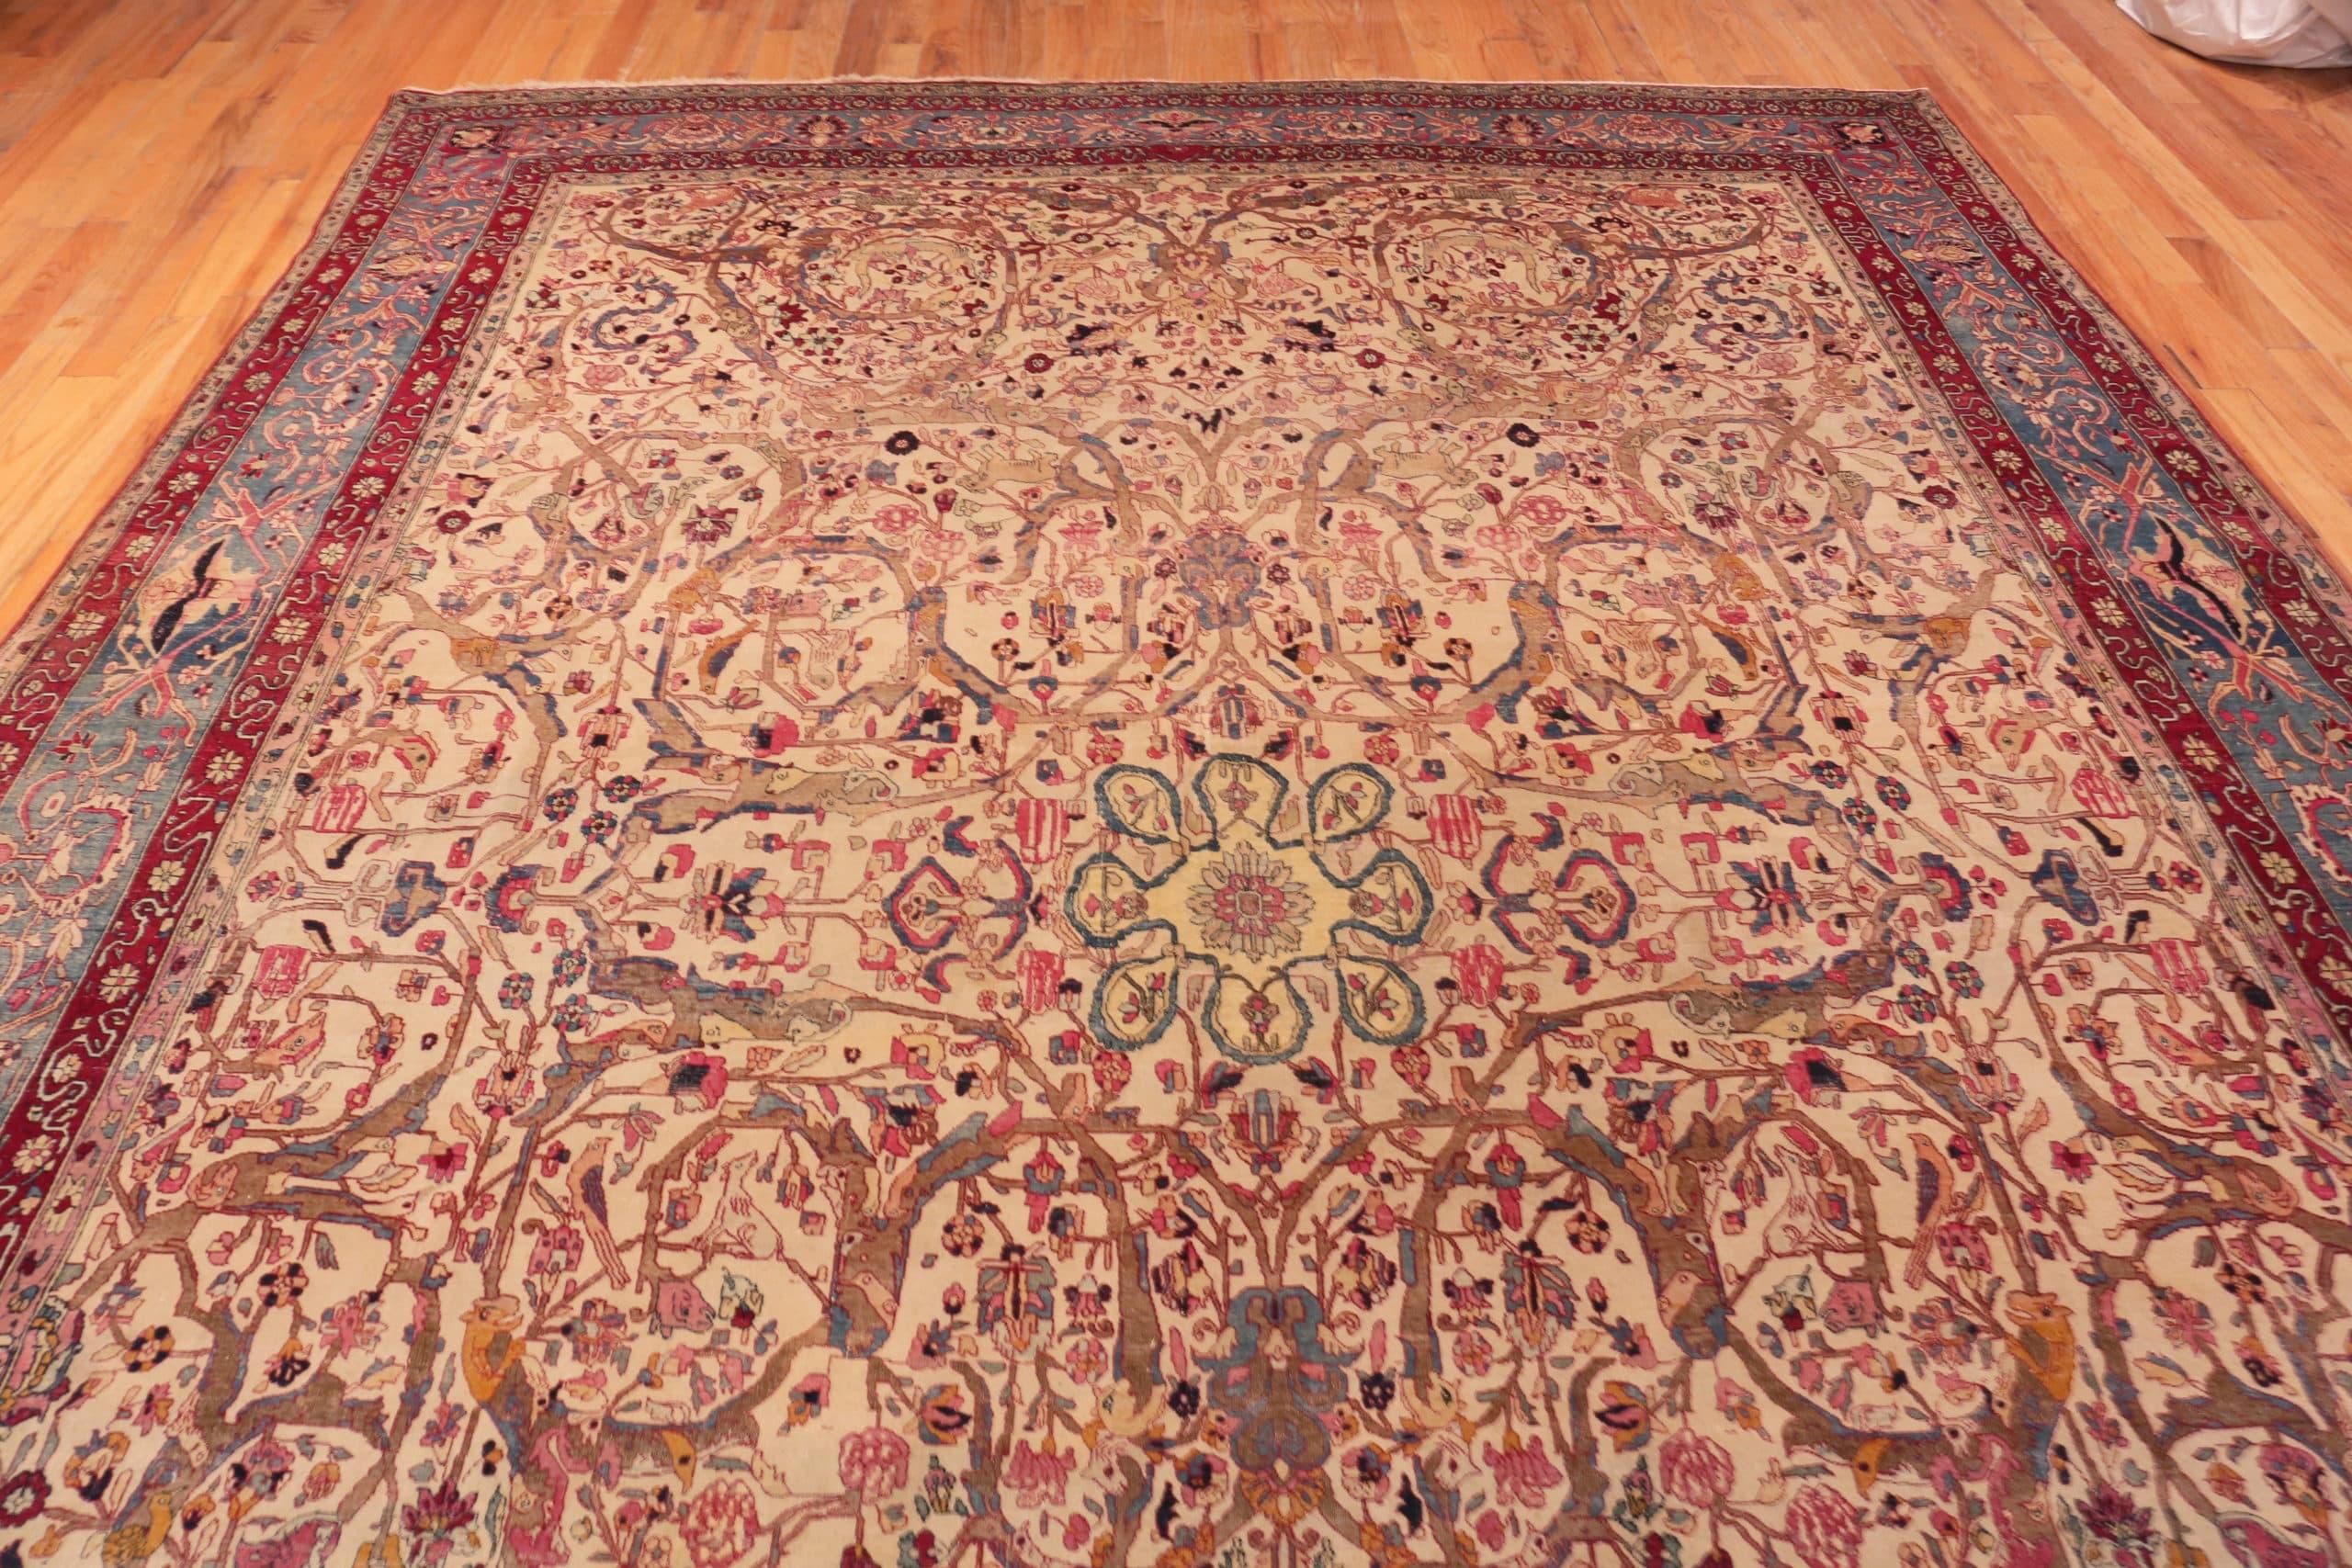 Magnificent Antique Persian Tehran Animal Design Area Rug, Country of Origin / rug type: Persian rug, Circa date: 1900. Size: 10 ft 1 in x 13 ft 8 in (3.07 m x 4.17 m)